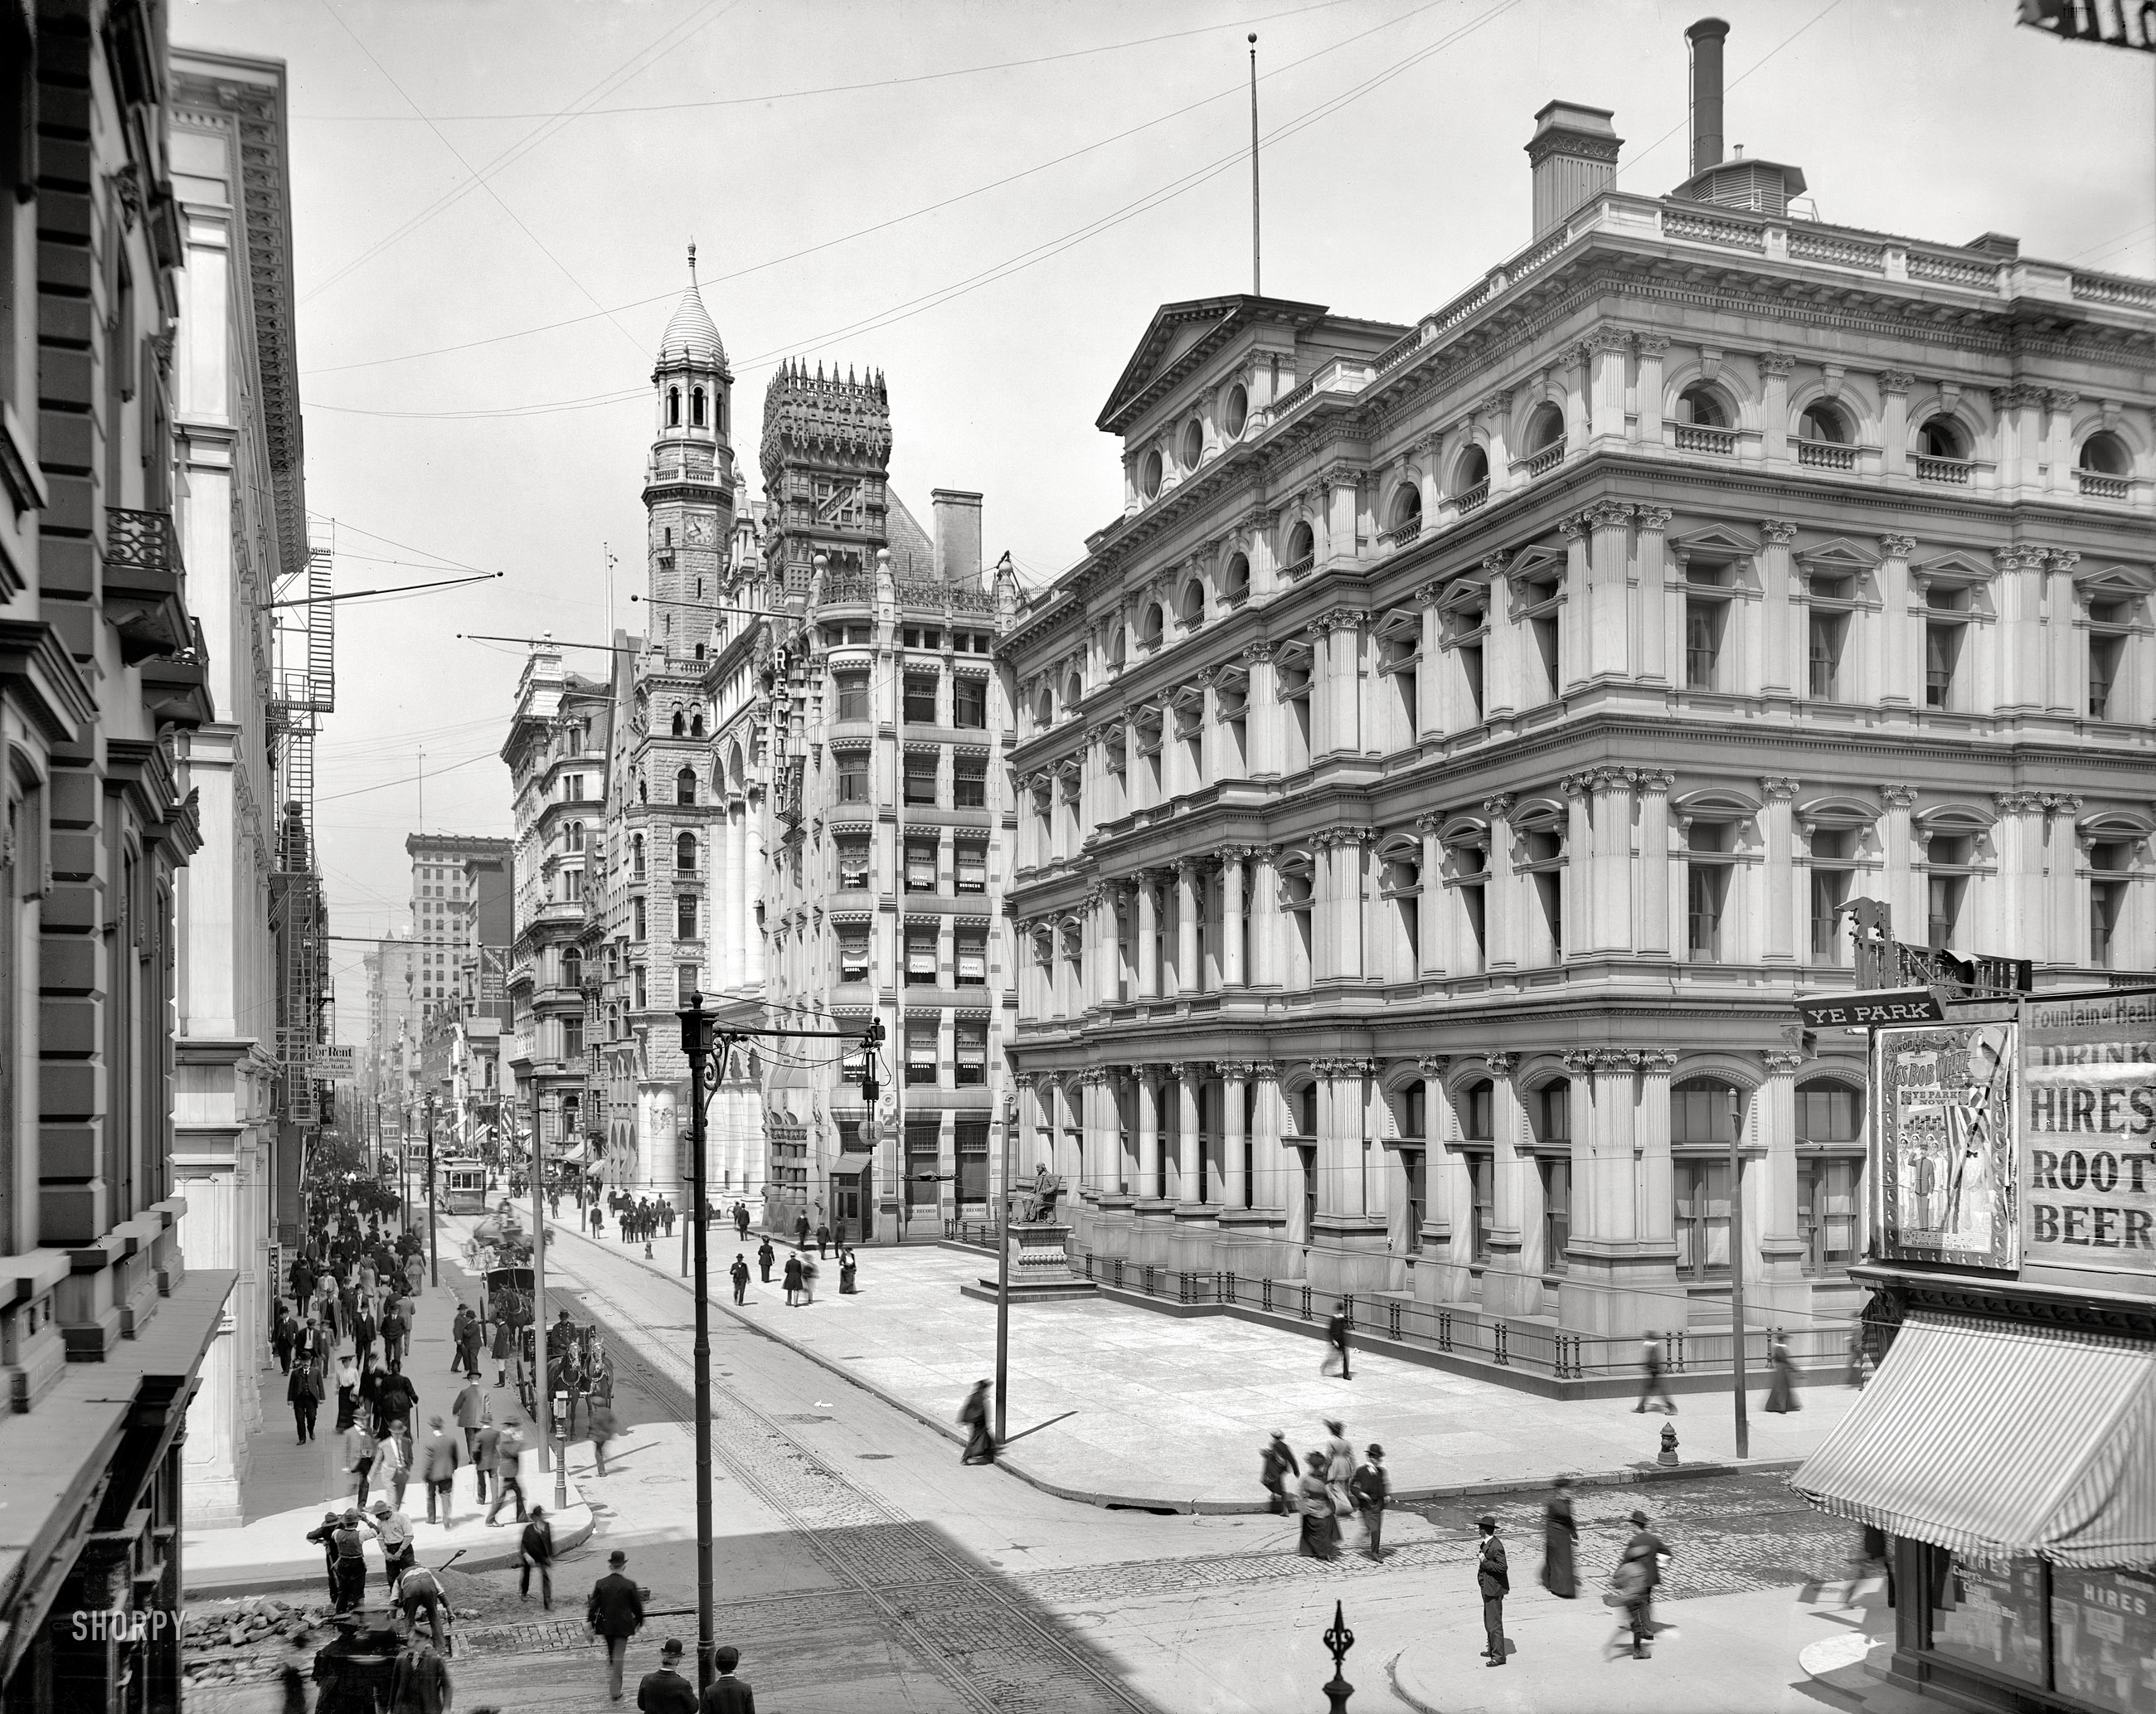 Philadelphia circa 1904. "Chestnut Street and post office." Plus signage promoting that "Fountain of Health," Hires Root Beer, and a theatrical production called Miss Bob White. 8x10 glass negative, Detroit Publishing Co. View full size.